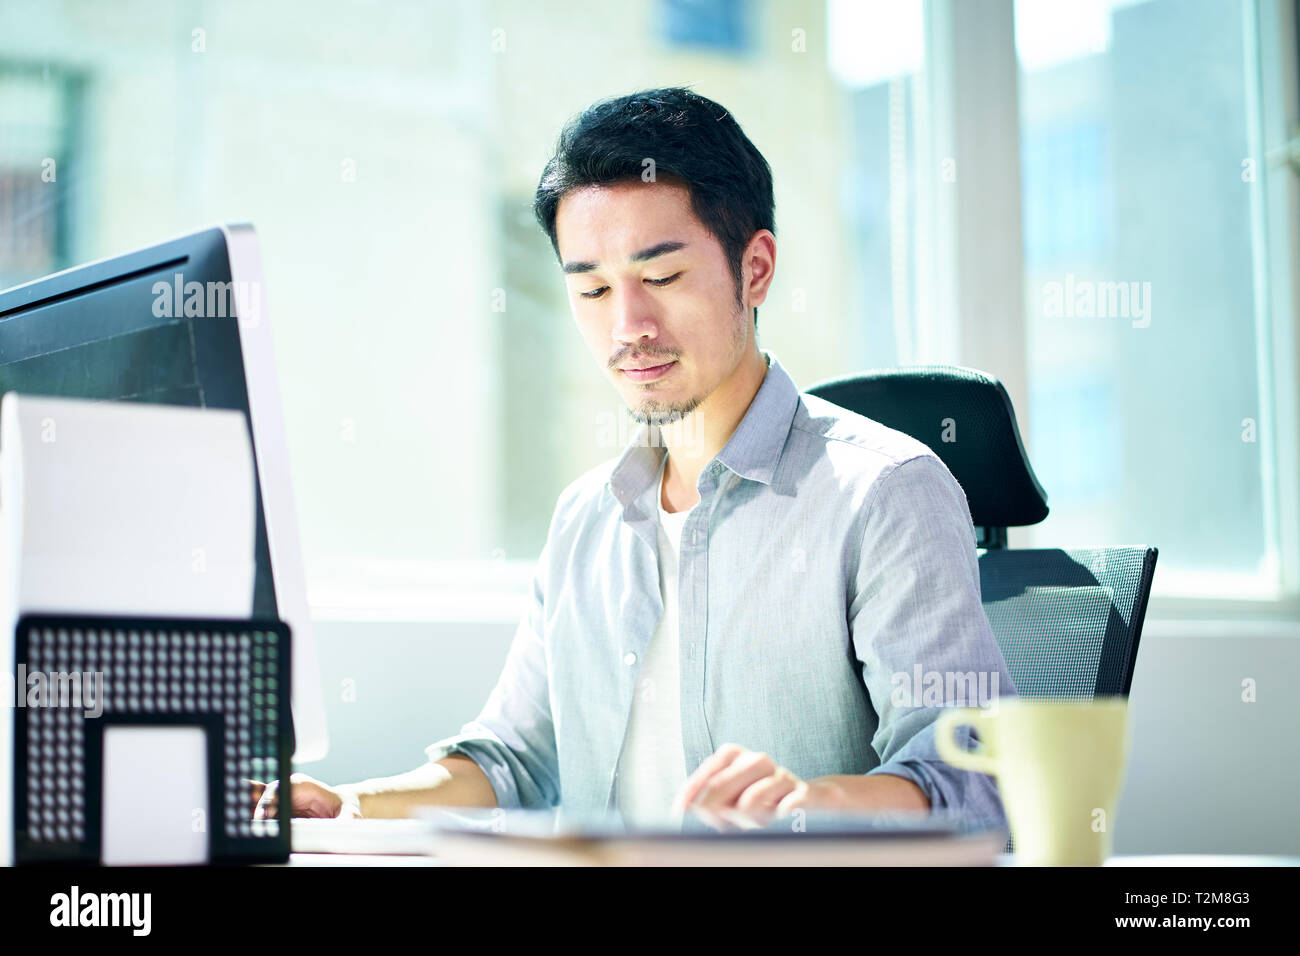 young asian businessman entrepreneur working in office using desktop computer. Stock Photo